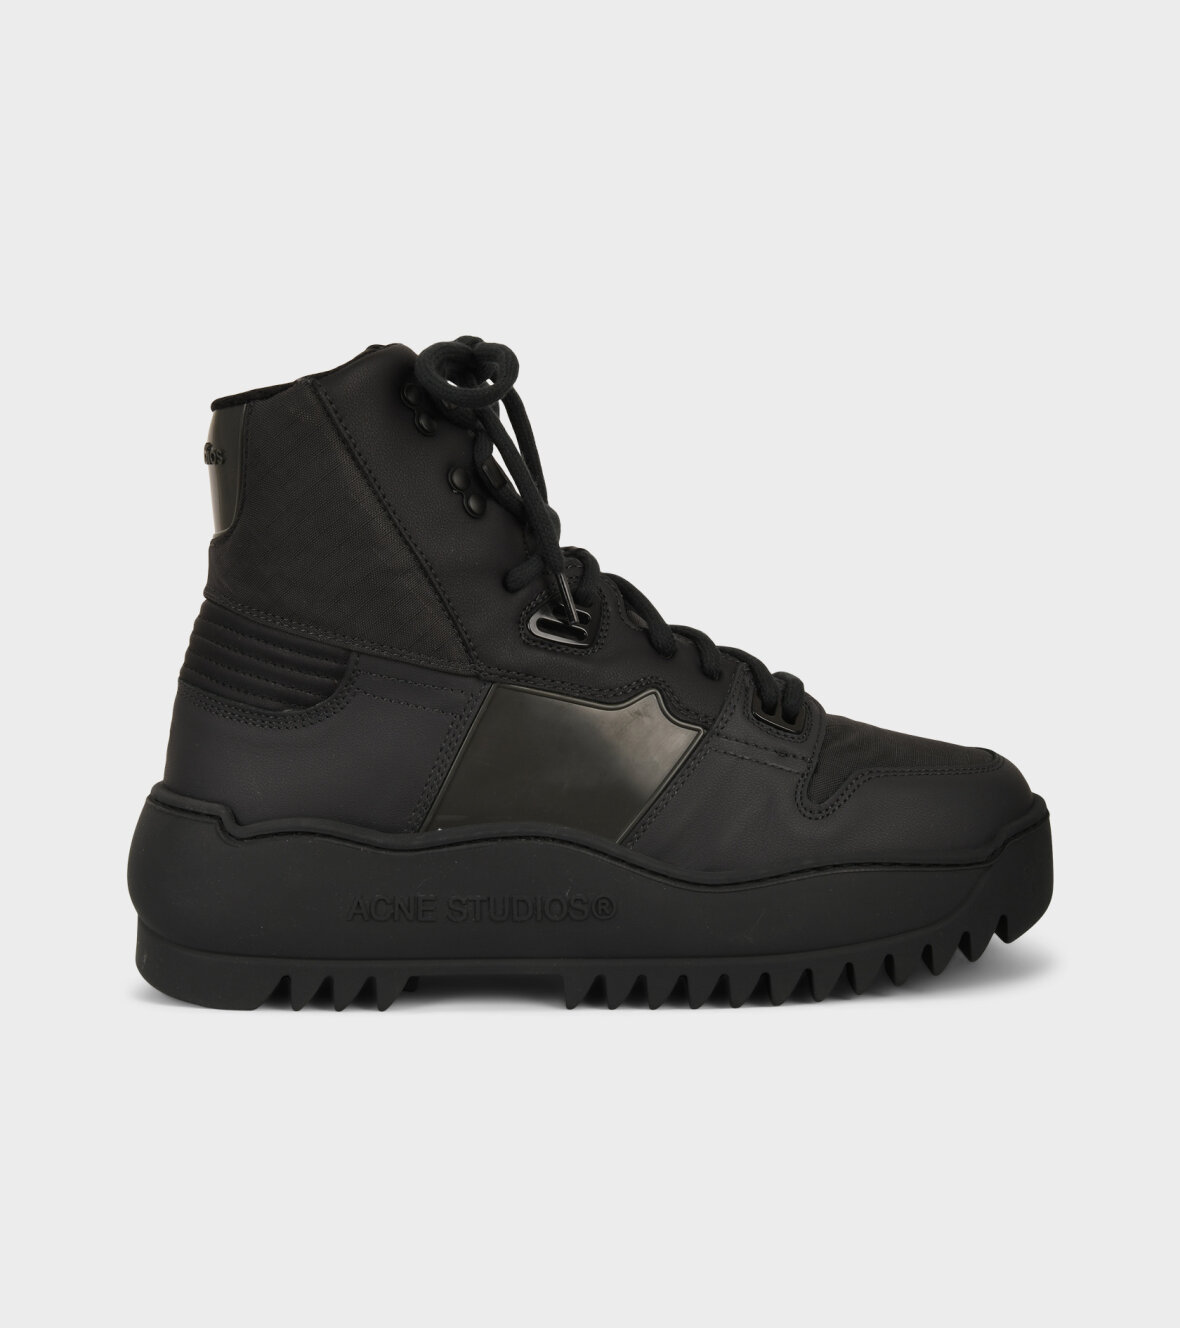 Adams - Acne Leather Up Ankel Boots Multi